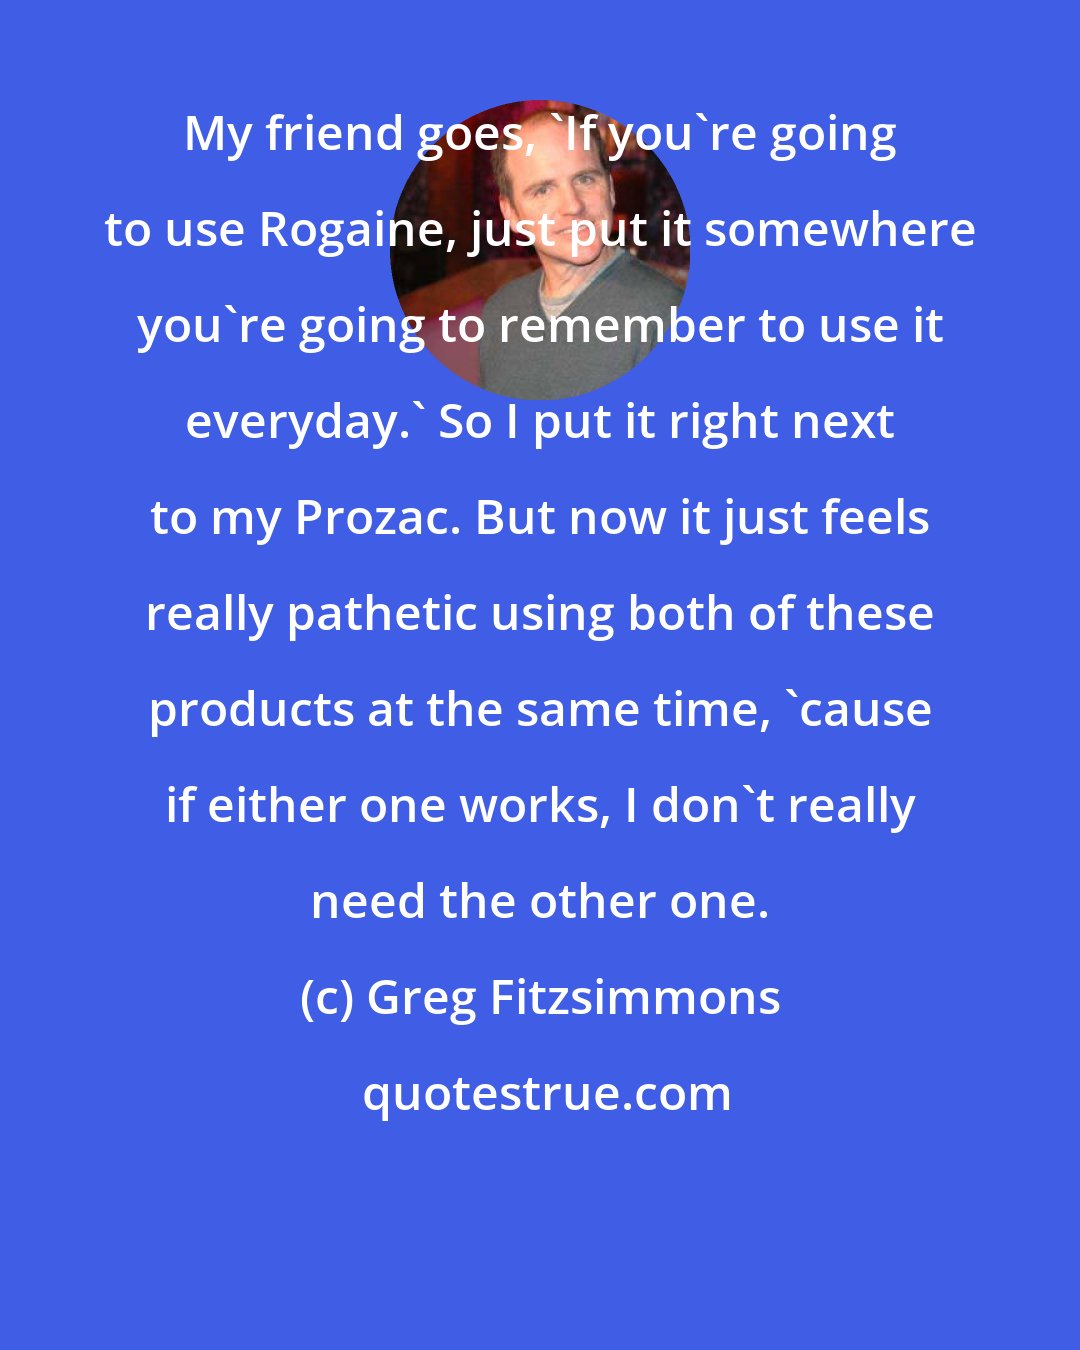 Greg Fitzsimmons: My friend goes, 'If you're going to use Rogaine, just put it somewhere you're going to remember to use it everyday.' So I put it right next to my Prozac. But now it just feels really pathetic using both of these products at the same time, 'cause if either one works, I don't really need the other one.